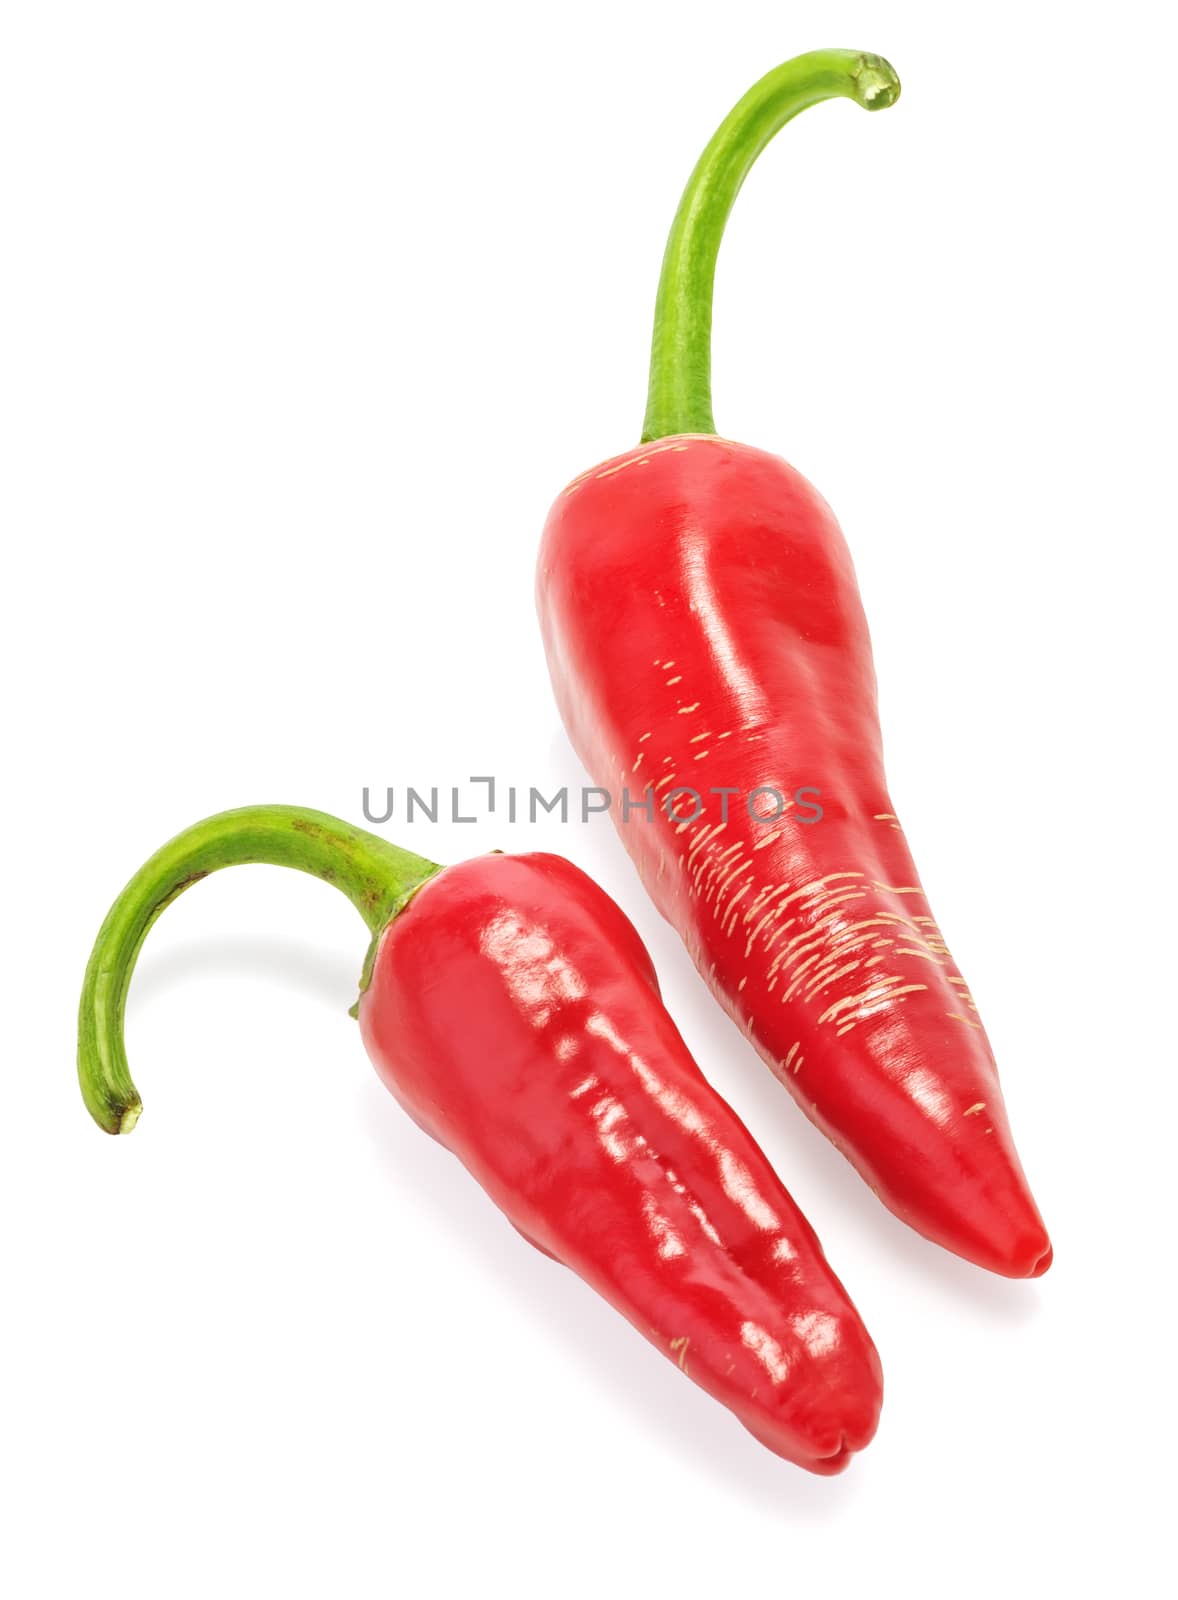 red hot chilli peppers by iprachenko